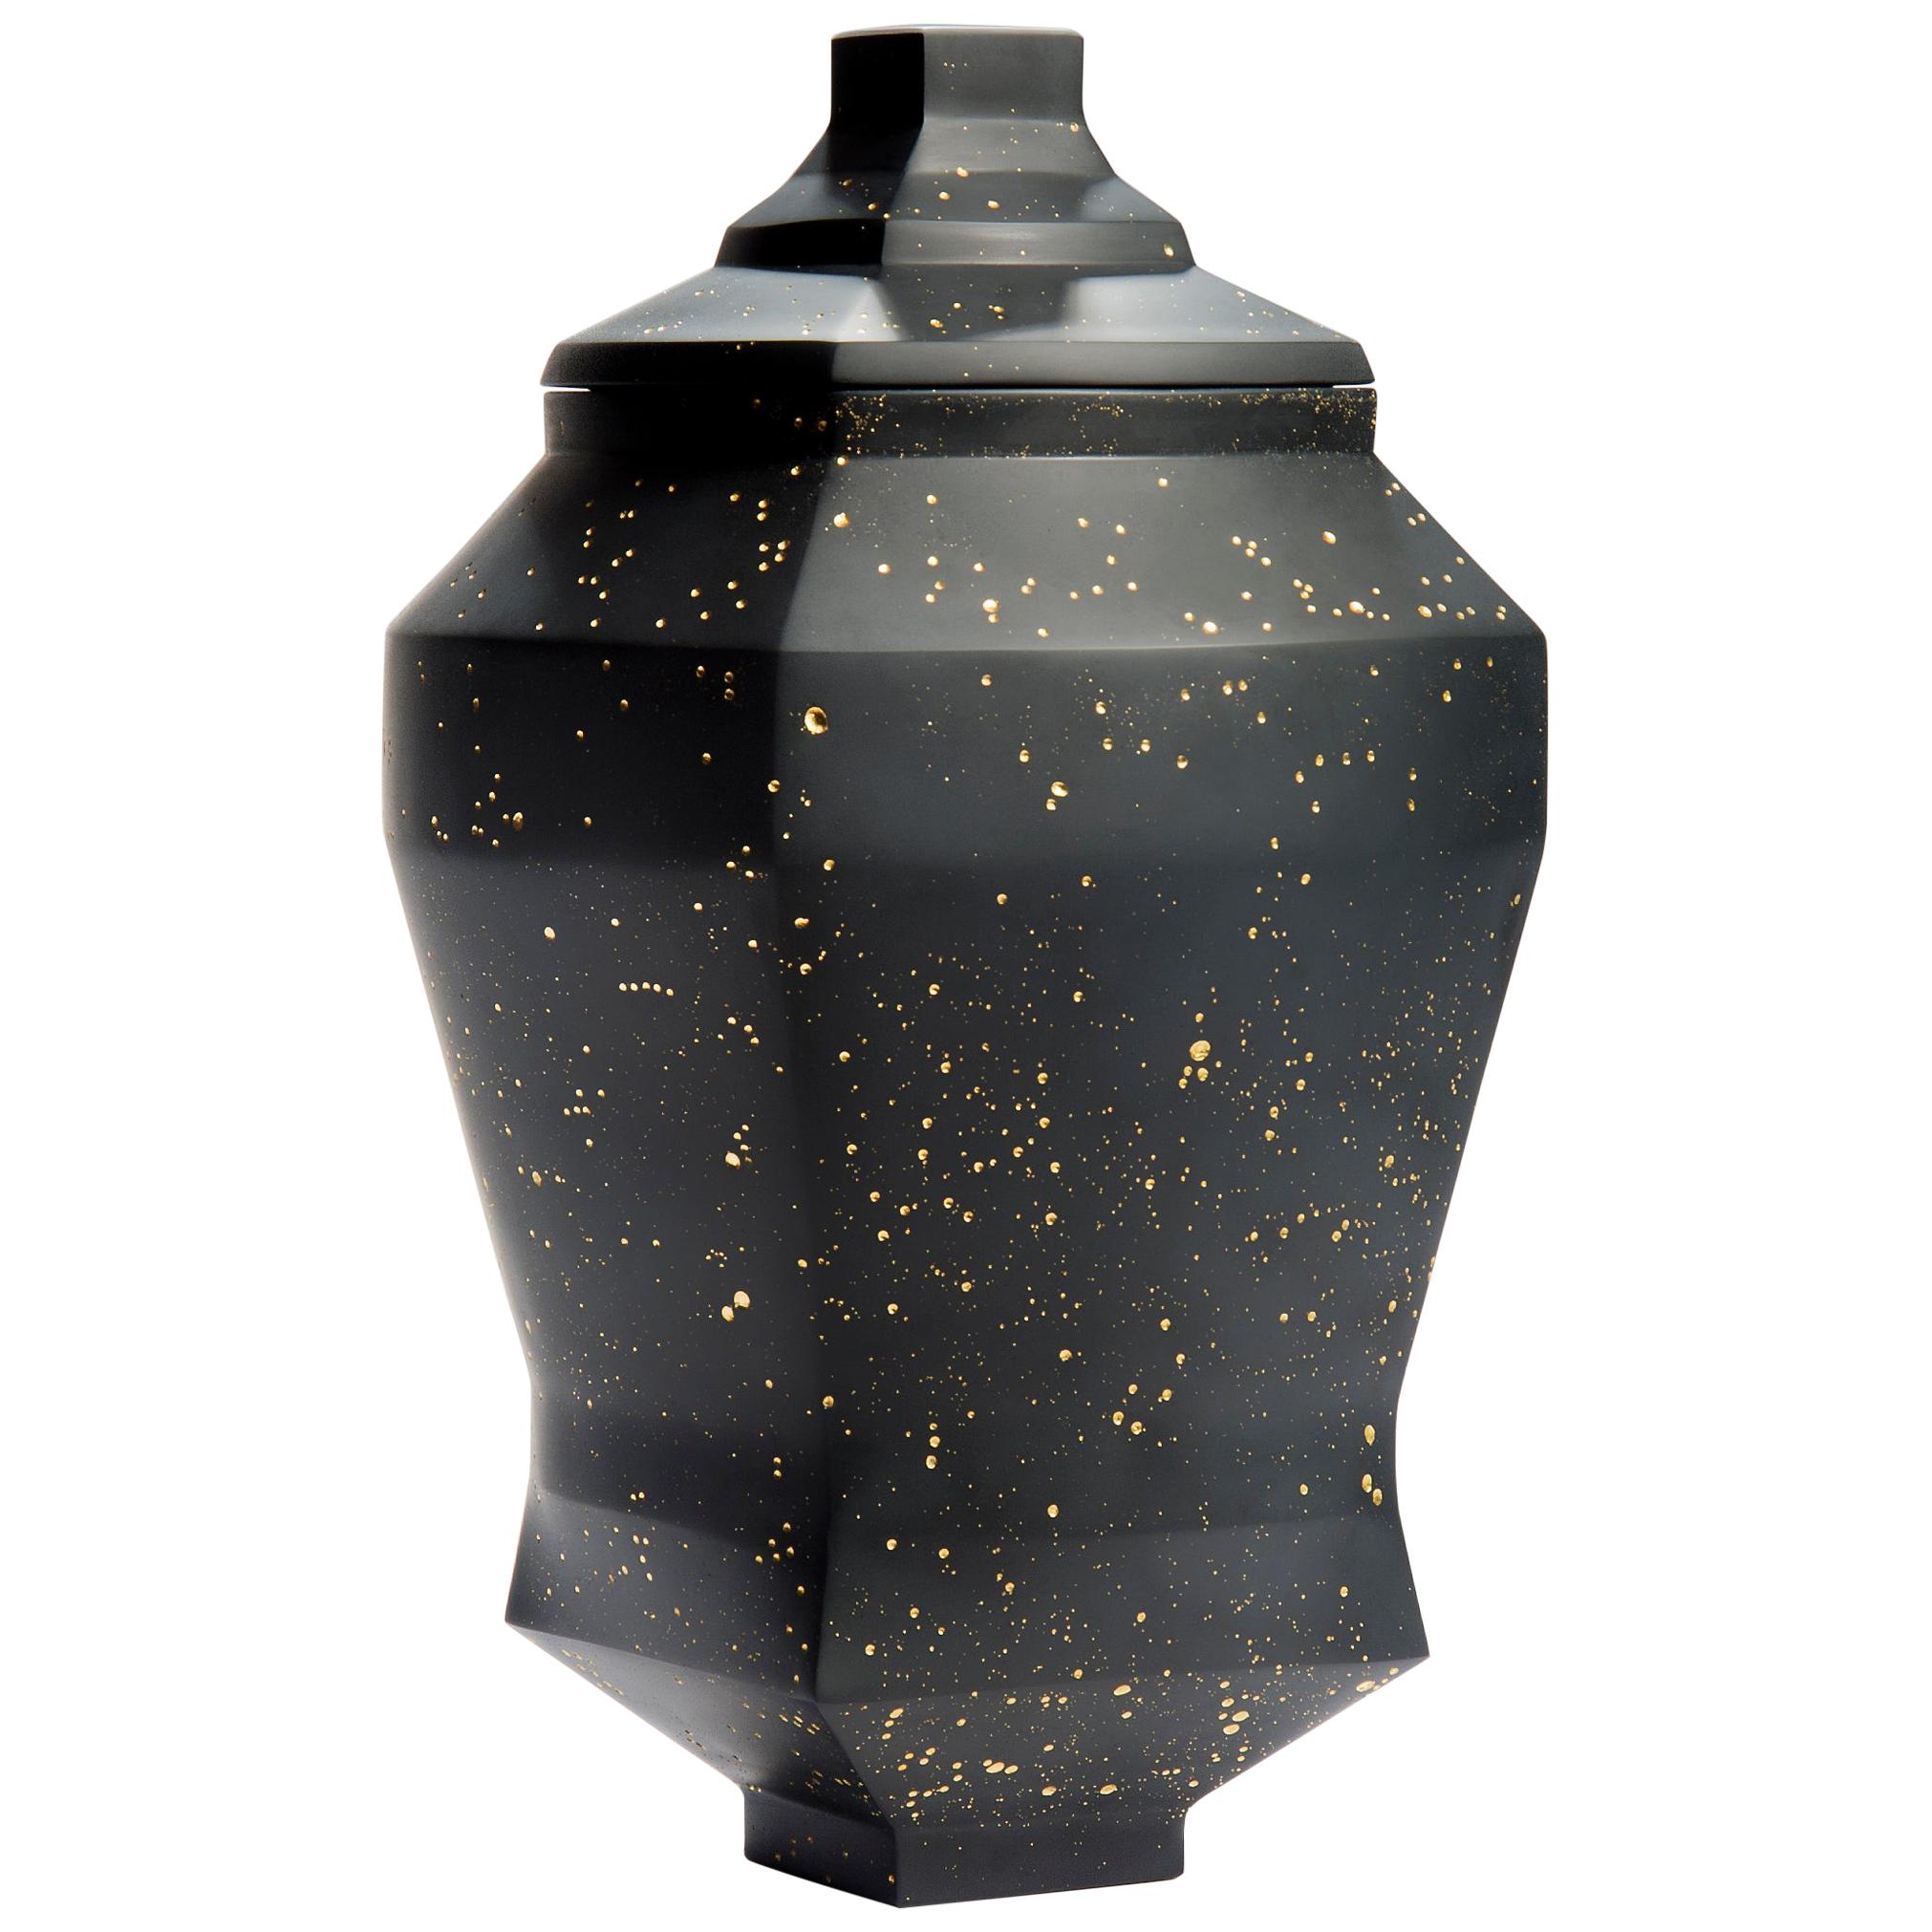 Daam Dah 9, a Unique Black Glass Lidded Box with Gold Detail by Choi Keeryong